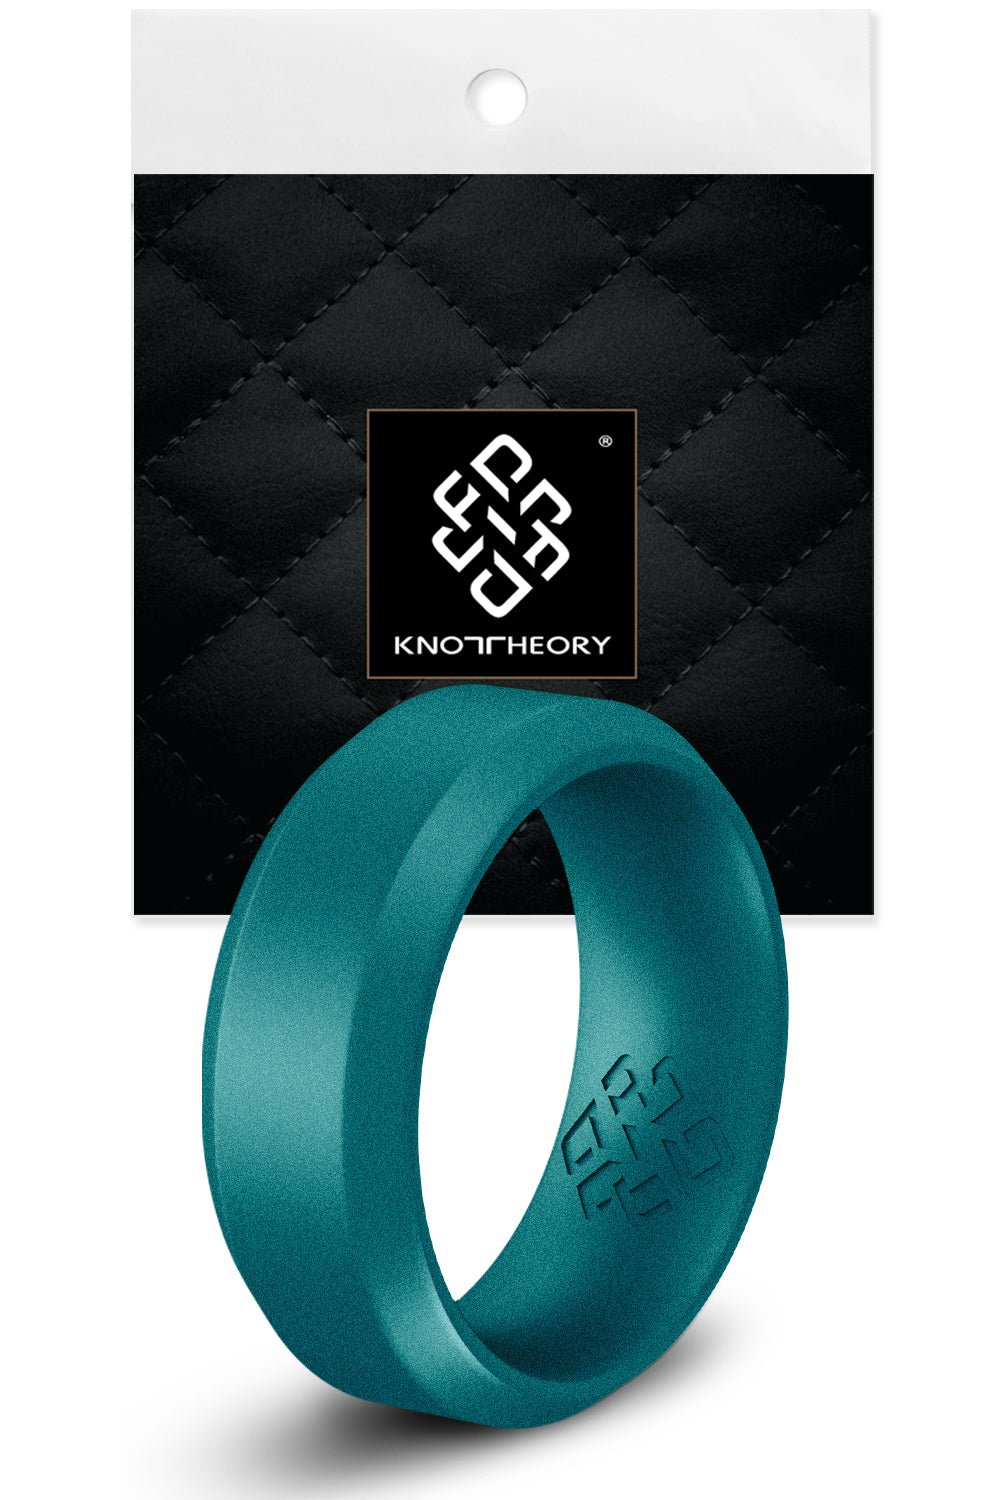 Lagoon Teal Bevel Edge Breathable Silicone Ring For Men - Knot Theory